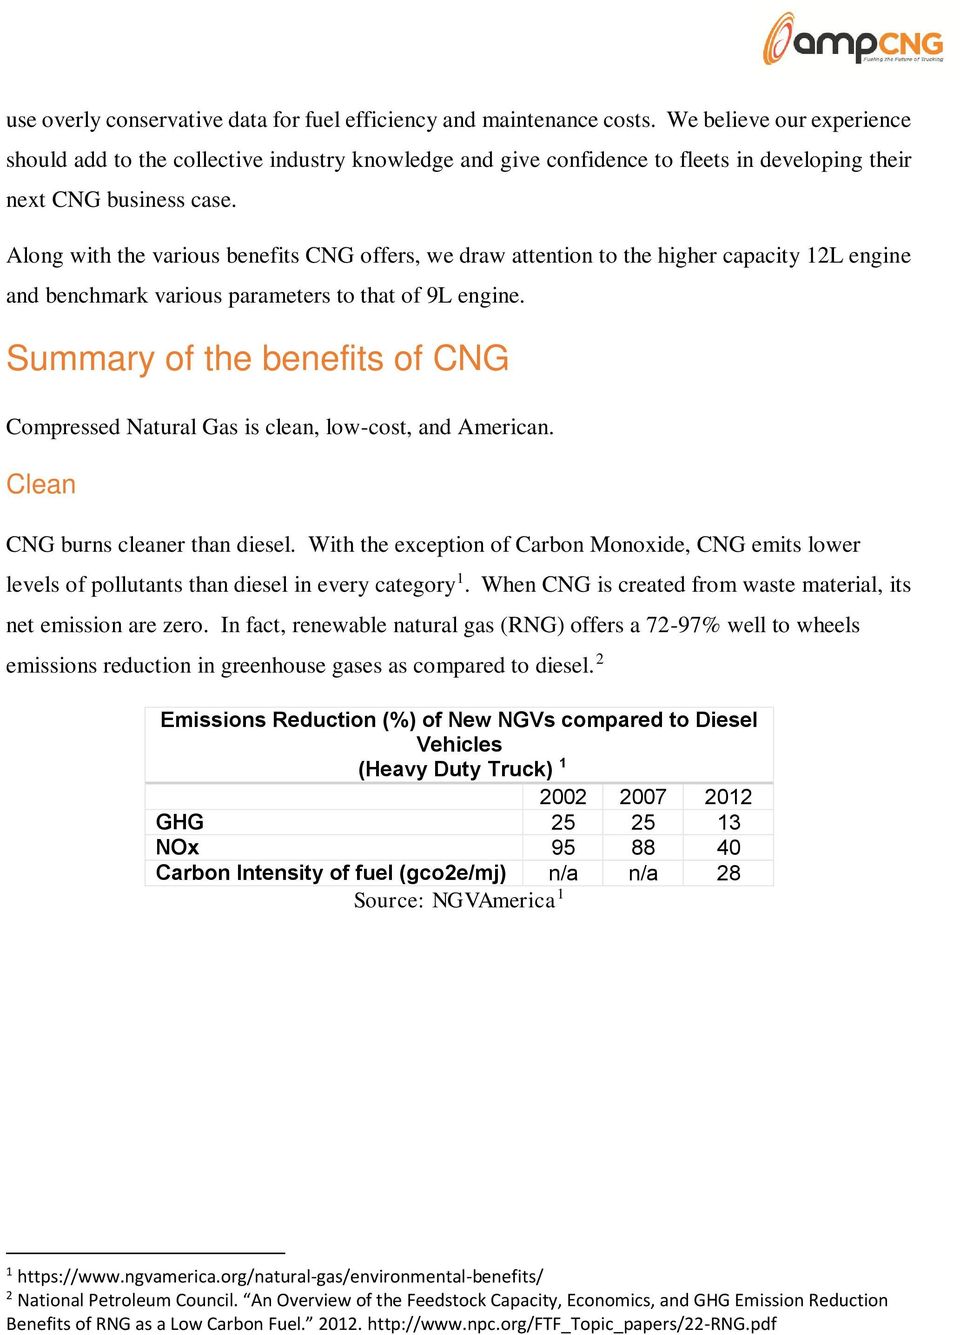 Along with the various benefits CNG offers, we draw attention to the higher capacity 12L engine and benchmark various parameters to that of 9L engine.